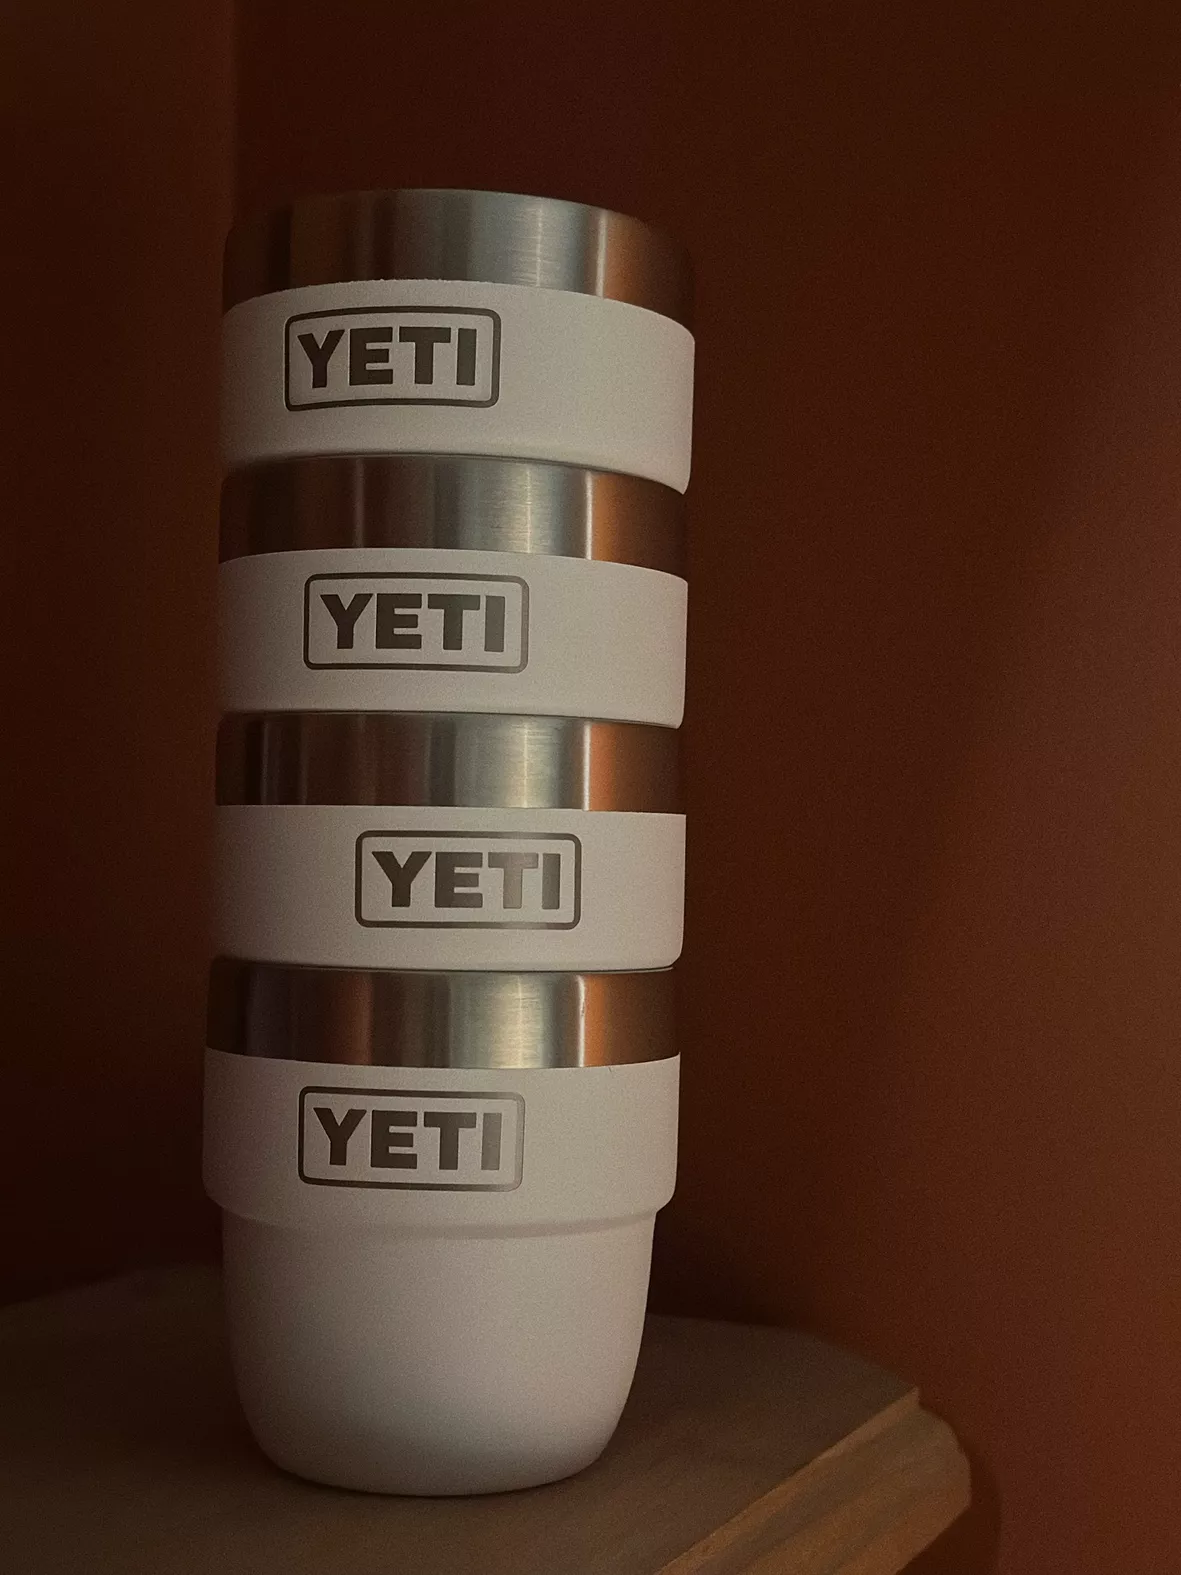 I am in love with the color red. And I am in love with @yeti. So when